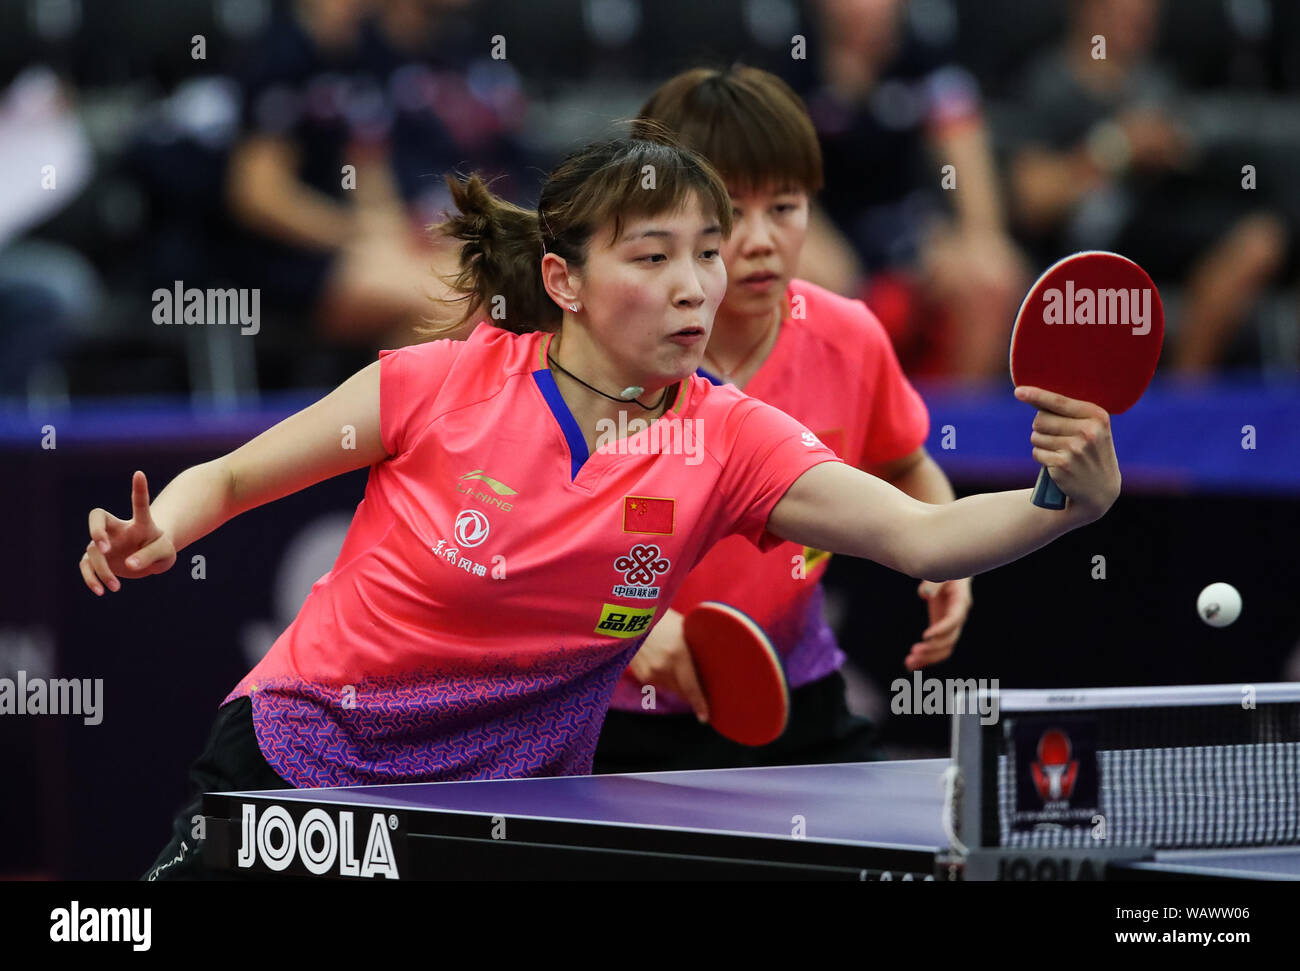 Olomouc, Czech Republic. 22nd Aug, 2019. Chen Xingtong/Qian Tianyi (L) of China compete during a women's doubles round of 16 match against Stephanie Loeuillette/Audrey Zarif of France during 2019 ITTF Czech Open in Olomouc, the Czech Republic, Aug. 22, 2019. Credit: Shan Yuqi/Xinhua/Alamy Live News Stock Photo